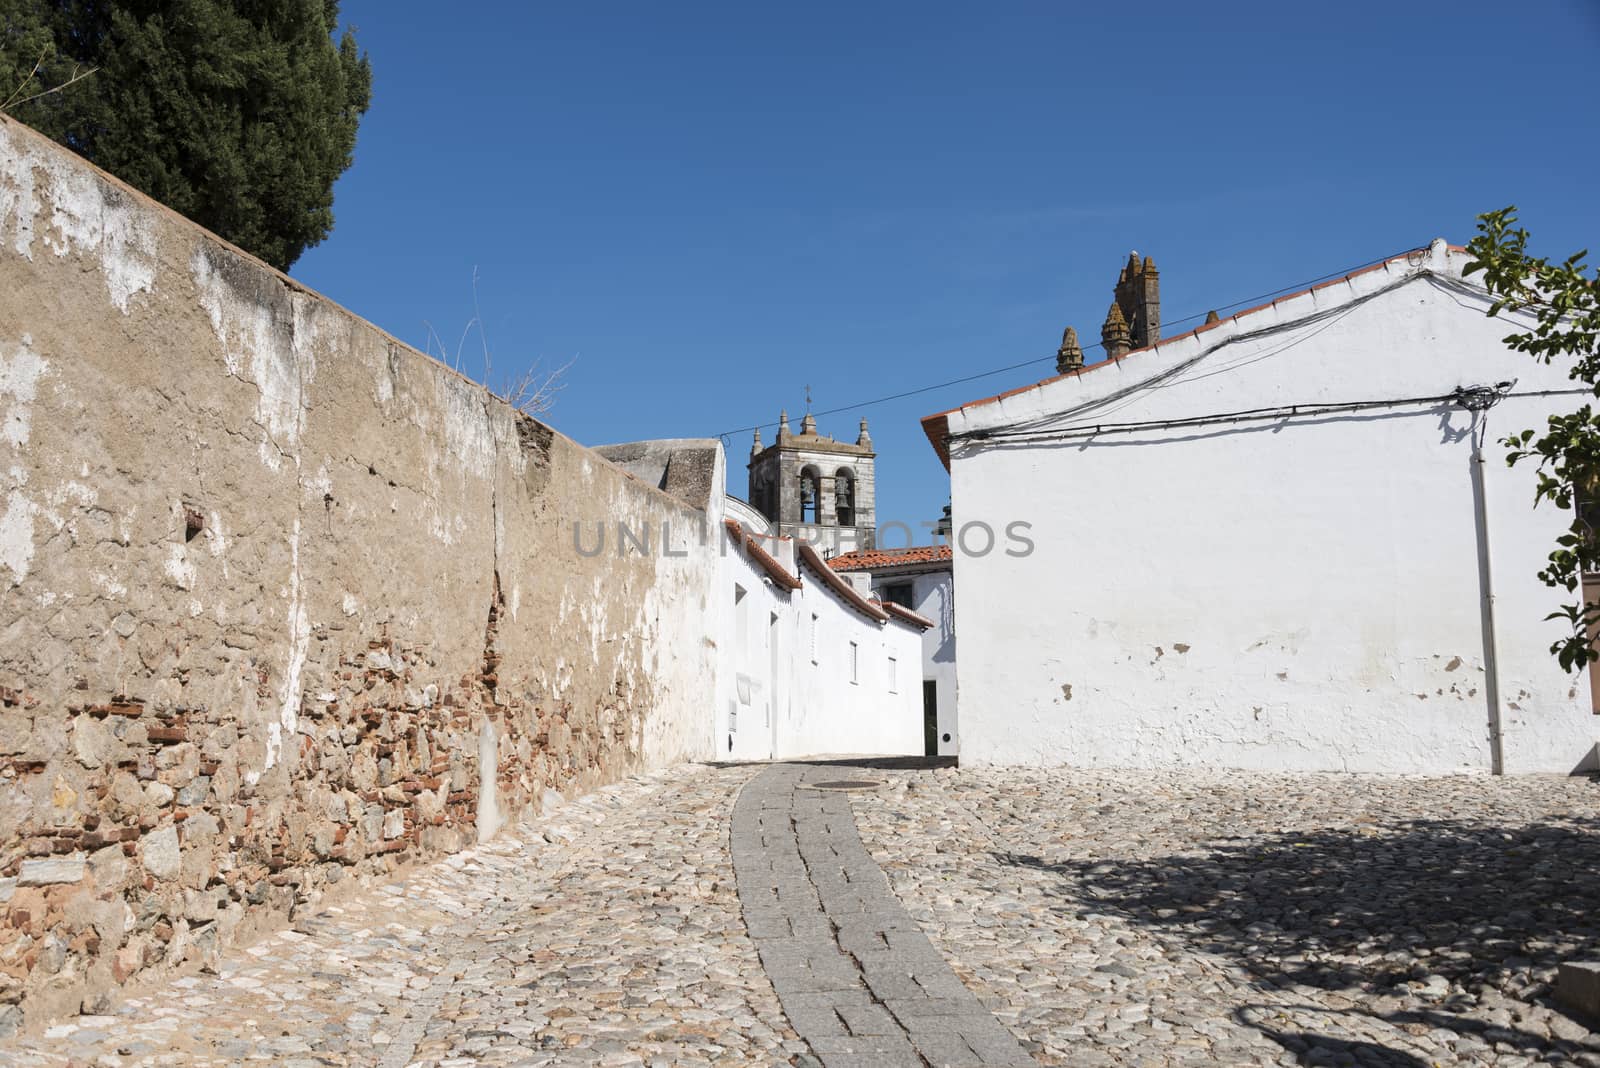 old street in the alentejo place moura